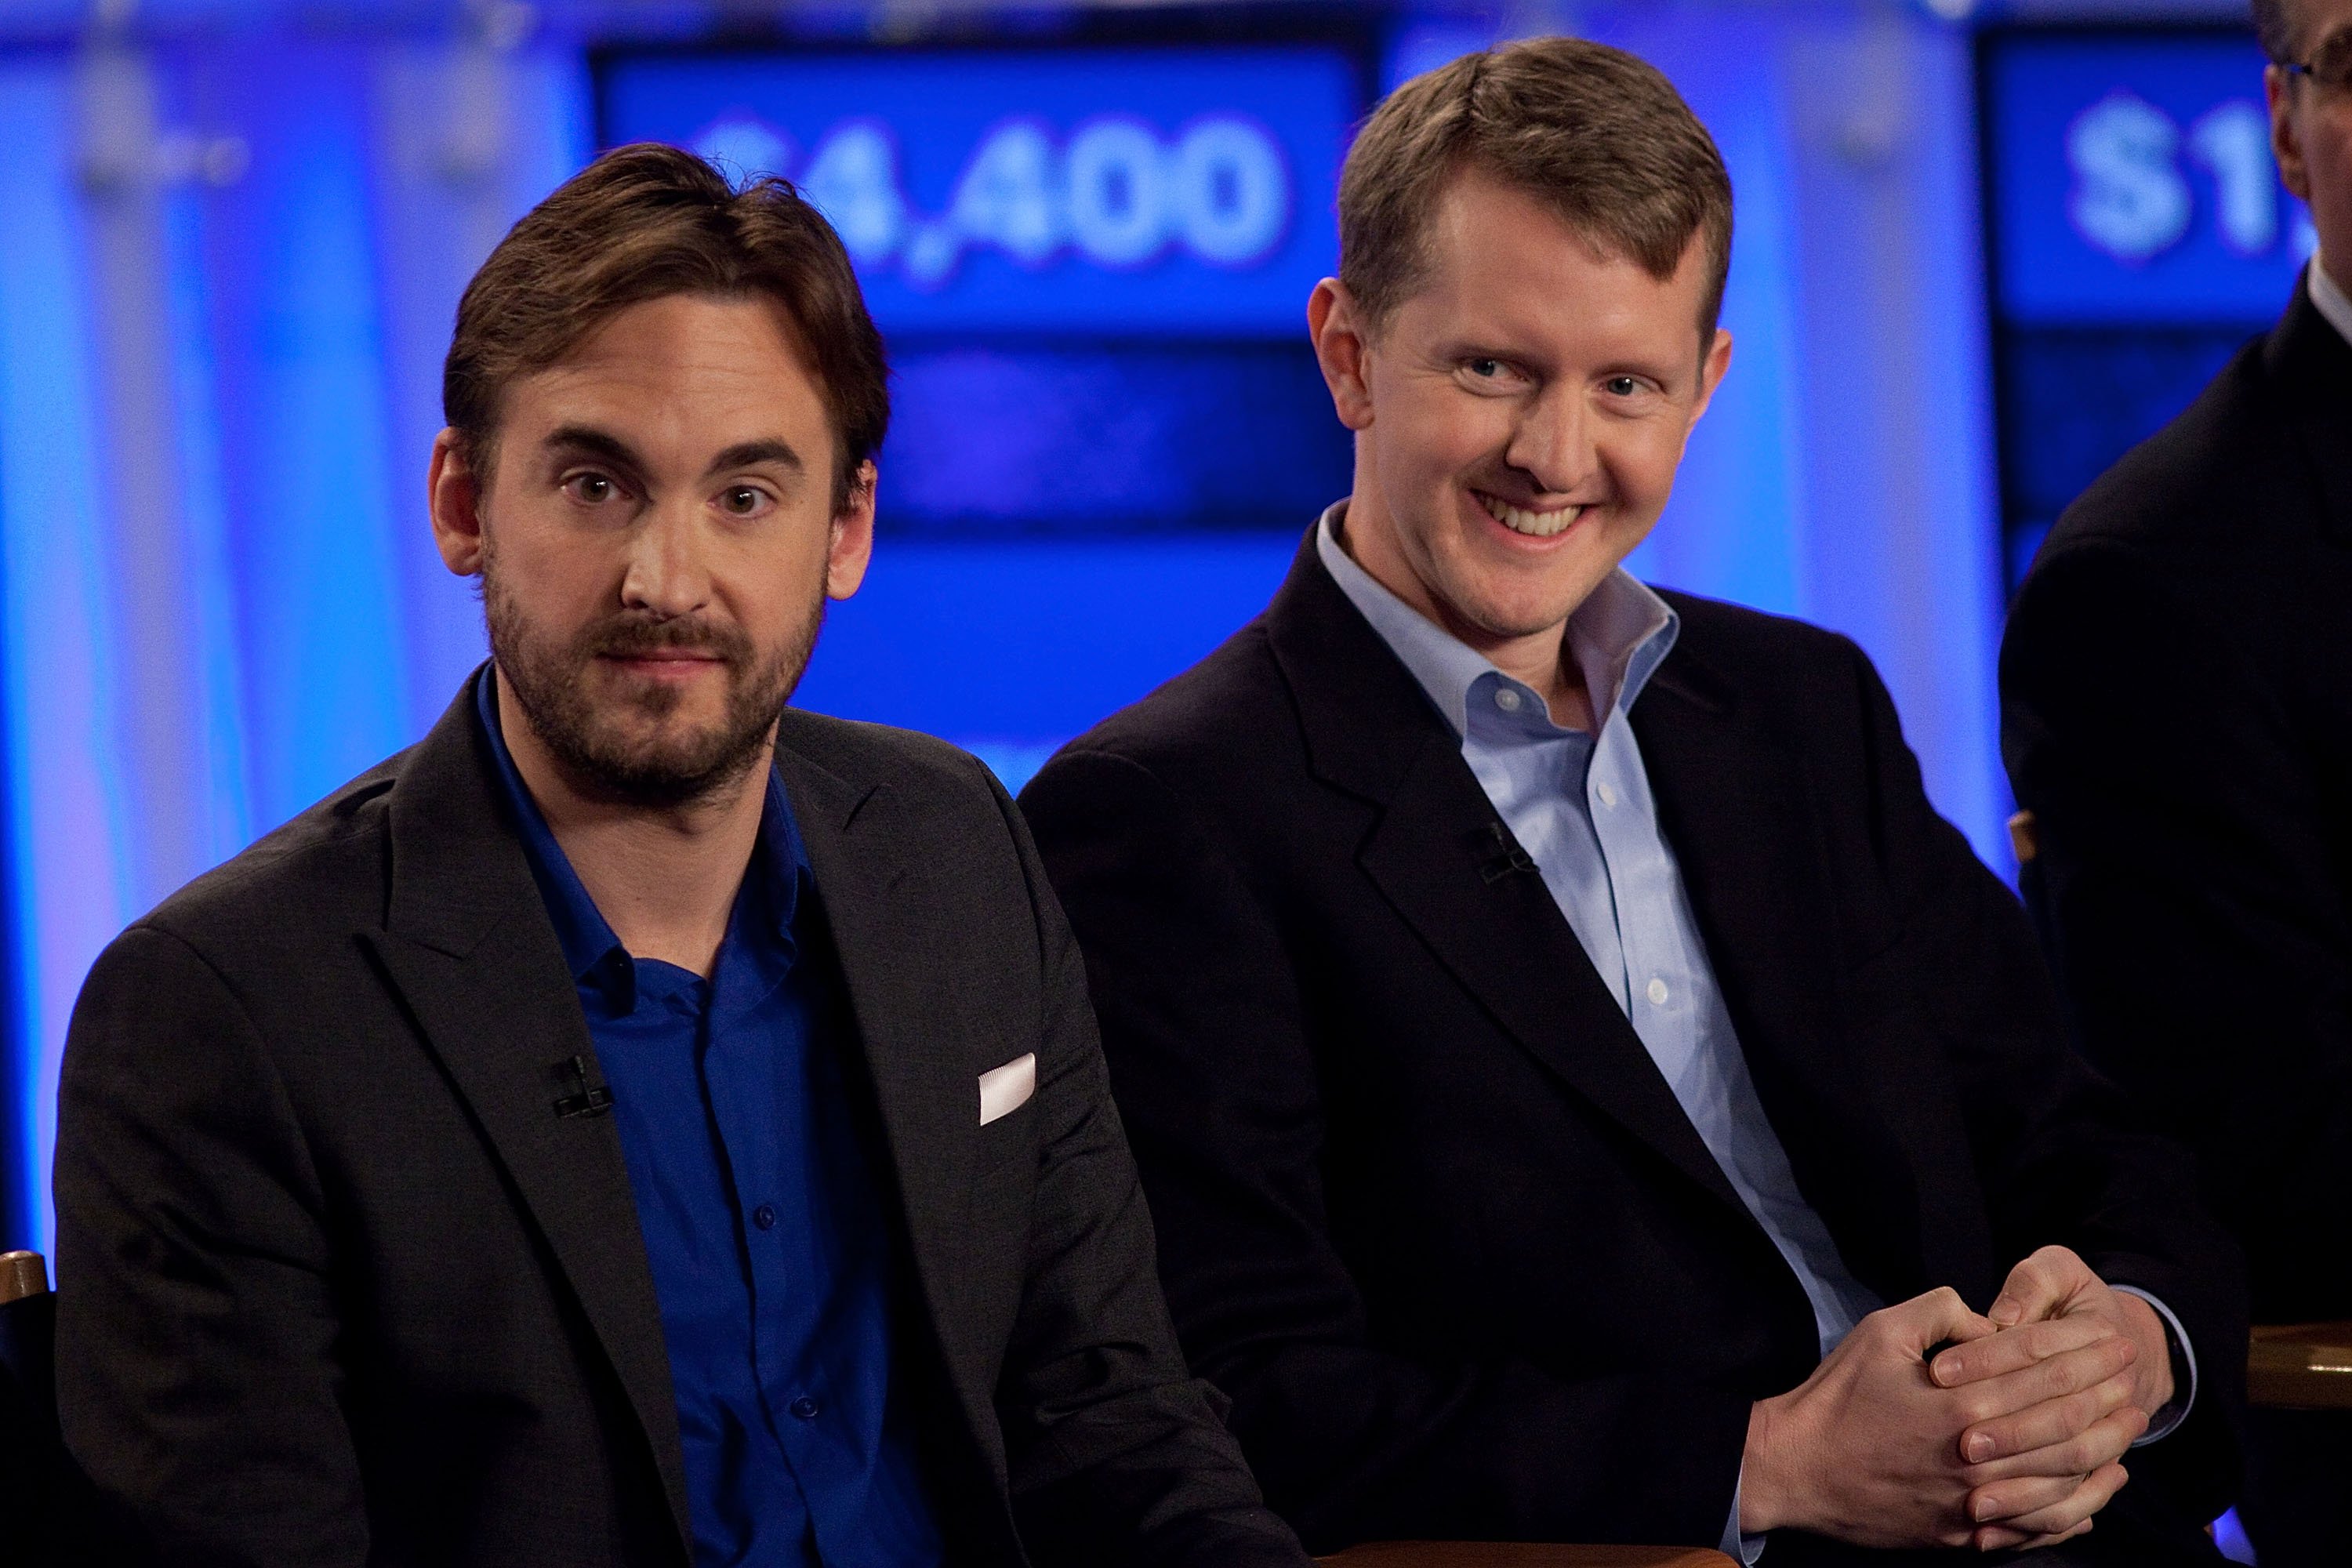 Brad Rutter and Ken Jennings in Yorktown Heights, New York on January 13, 2011. | Photo: Getty Images